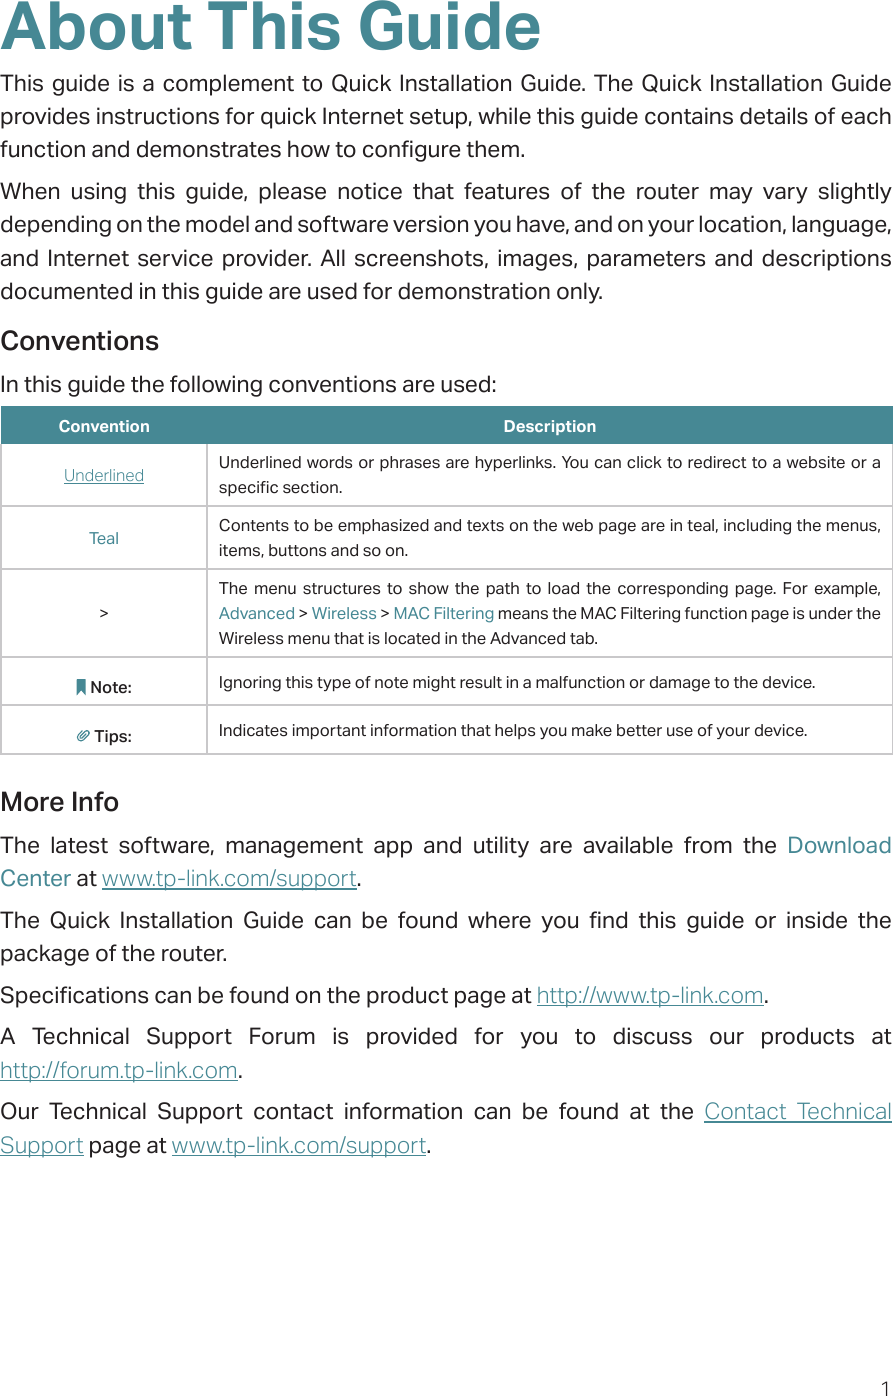 1About This GuideThis guide is a complement to Quick Installation Guide. The Quick Installation Guide provides instructions for quick Internet setup, while this guide contains details of each function and demonstrates how to configure them. When using this guide, please notice that features of the router may vary slightly depending on the model and software version you have, and on your location, language, and Internet service provider. All screenshots, images, parameters and descriptions documented in this guide are used for demonstration only.ConventionsIn this guide the following conventions are used:Convention DescriptionUnderlined Underlined words or phrases are hyperlinks. You can click to redirect to a website or a specific section.Teal Contents to be emphasized and texts on the web page are in teal, including the menus, items, buttons and so on.&gt;The menu structures to show the path to load the corresponding page. For example, Advanced &gt; Wireless &gt; MAC Filtering means the MAC Filtering function page is under the Wireless menu that is located in the Advanced tab.Note: Ignoring this type of note might result in a malfunction or damage to the device.Tips: Indicates important information that helps you make better use of your device.More InfoThe latest software, management app and utility are available from the Download Center at www.tp-link.com/support.The Quick Installation Guide can be found where you find this guide or inside the package of the router.Specifications can be found on the product page at http://www.tp-link.com.A Technical Support Forum is provided for you to discuss our products at  http://forum.tp-link.com.Our Technical Support contact information can be found at the Contact Technical Support page at www.tp-link.com/support.